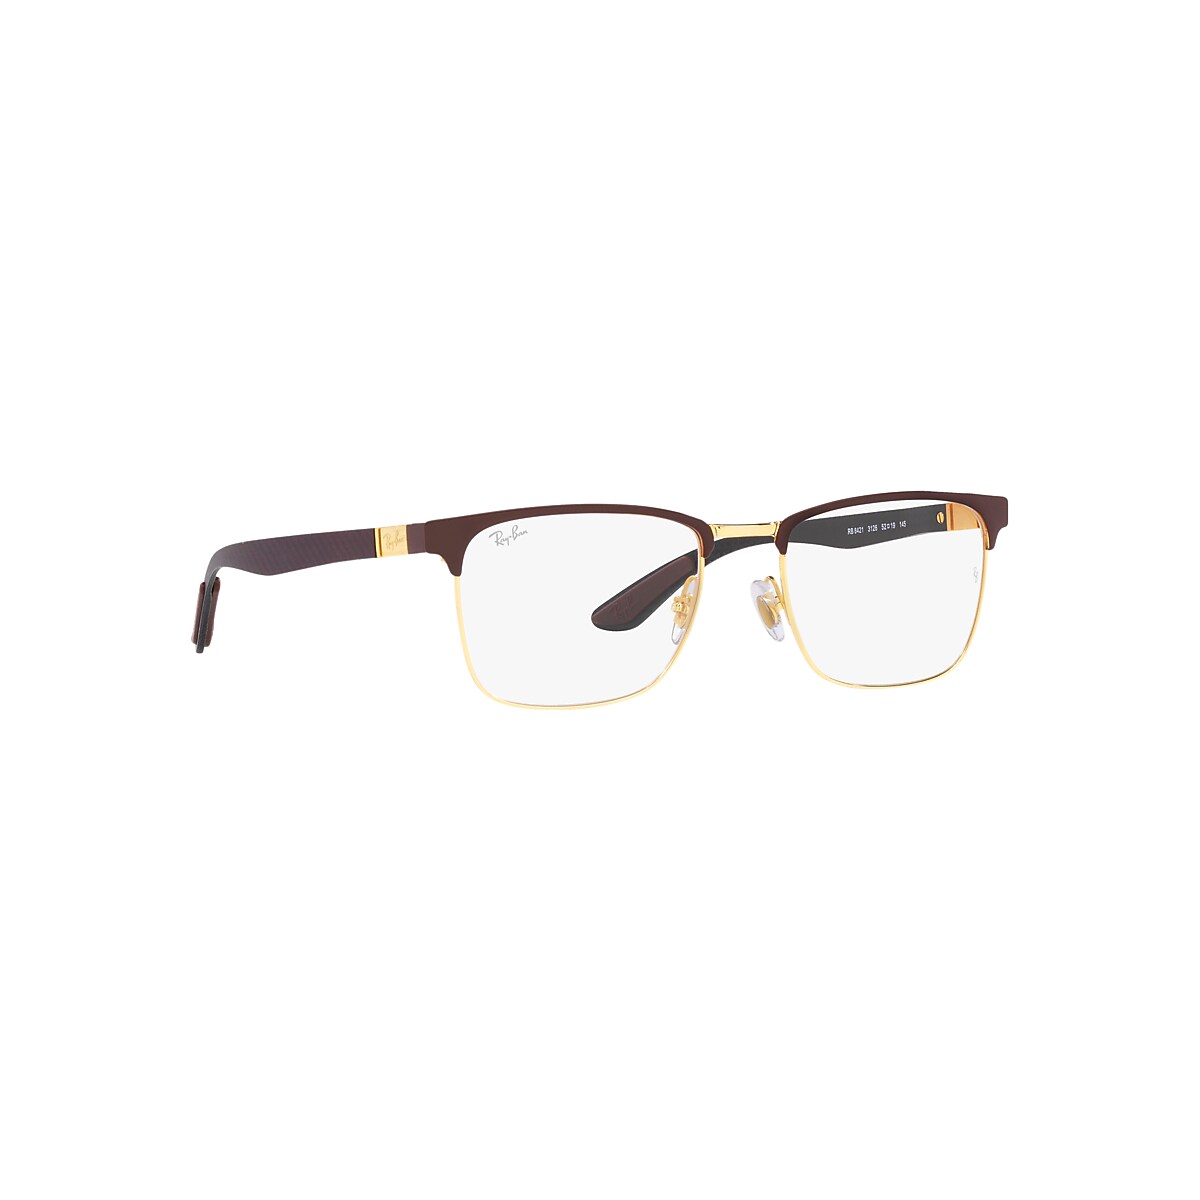 RB8421 OPTICS Eyeglasses with Brown On Gold Frame - RB8421 | Ray